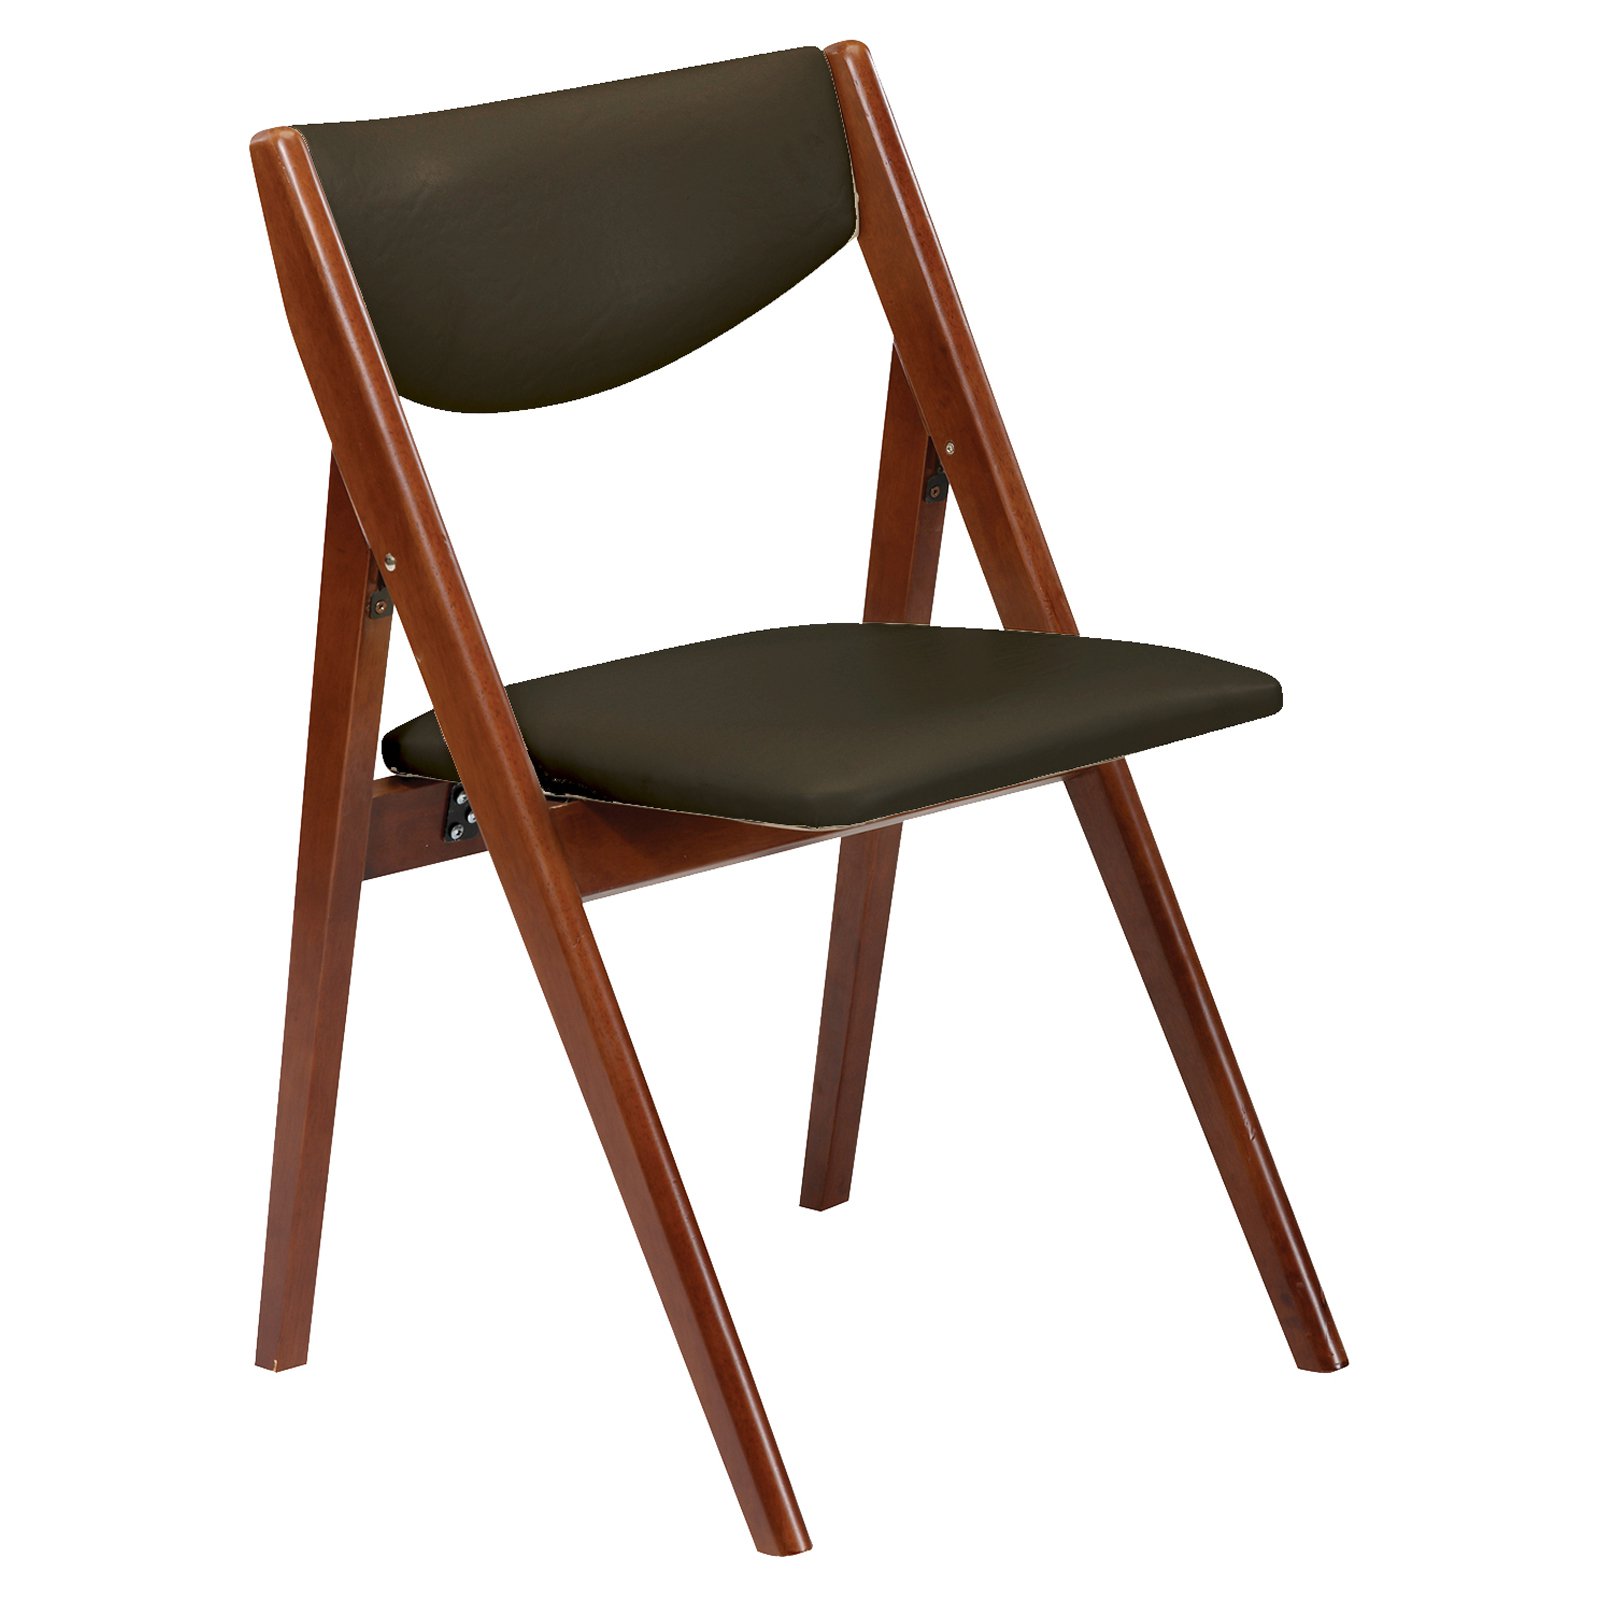 Mid-Century Modern Crème Vinyl Padded Folding Chair (2-Pack) with Wood Accents - image 2 of 2